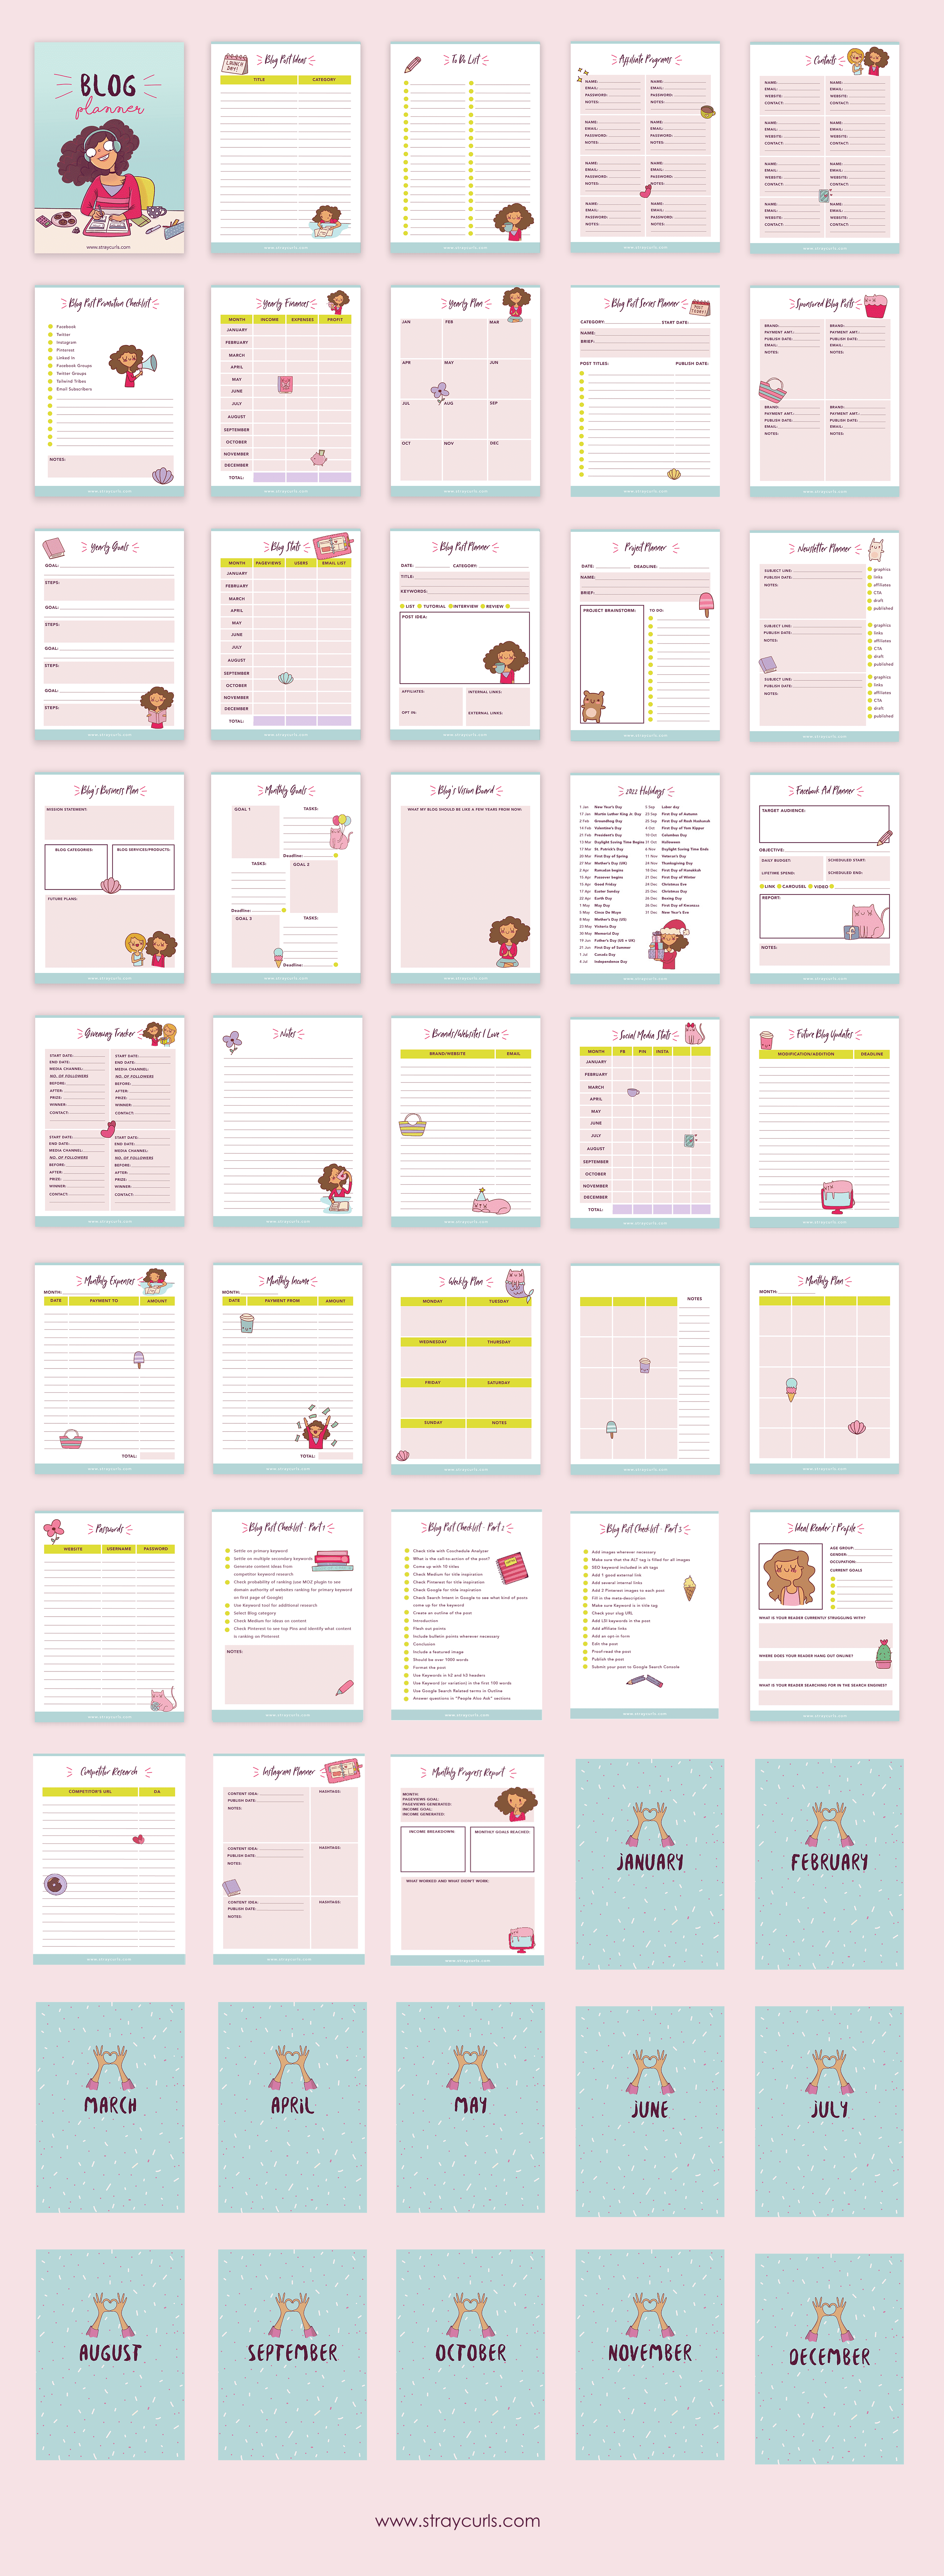 This cute blog planner is not only super cute with little girl and cat stickers but is also super functional! Stay super organised and keep track of all your blogging goals by downloading this 50 page blog planner! #blogplanner #plannerlife #planner #girlboss #free #freeprintable #blogging